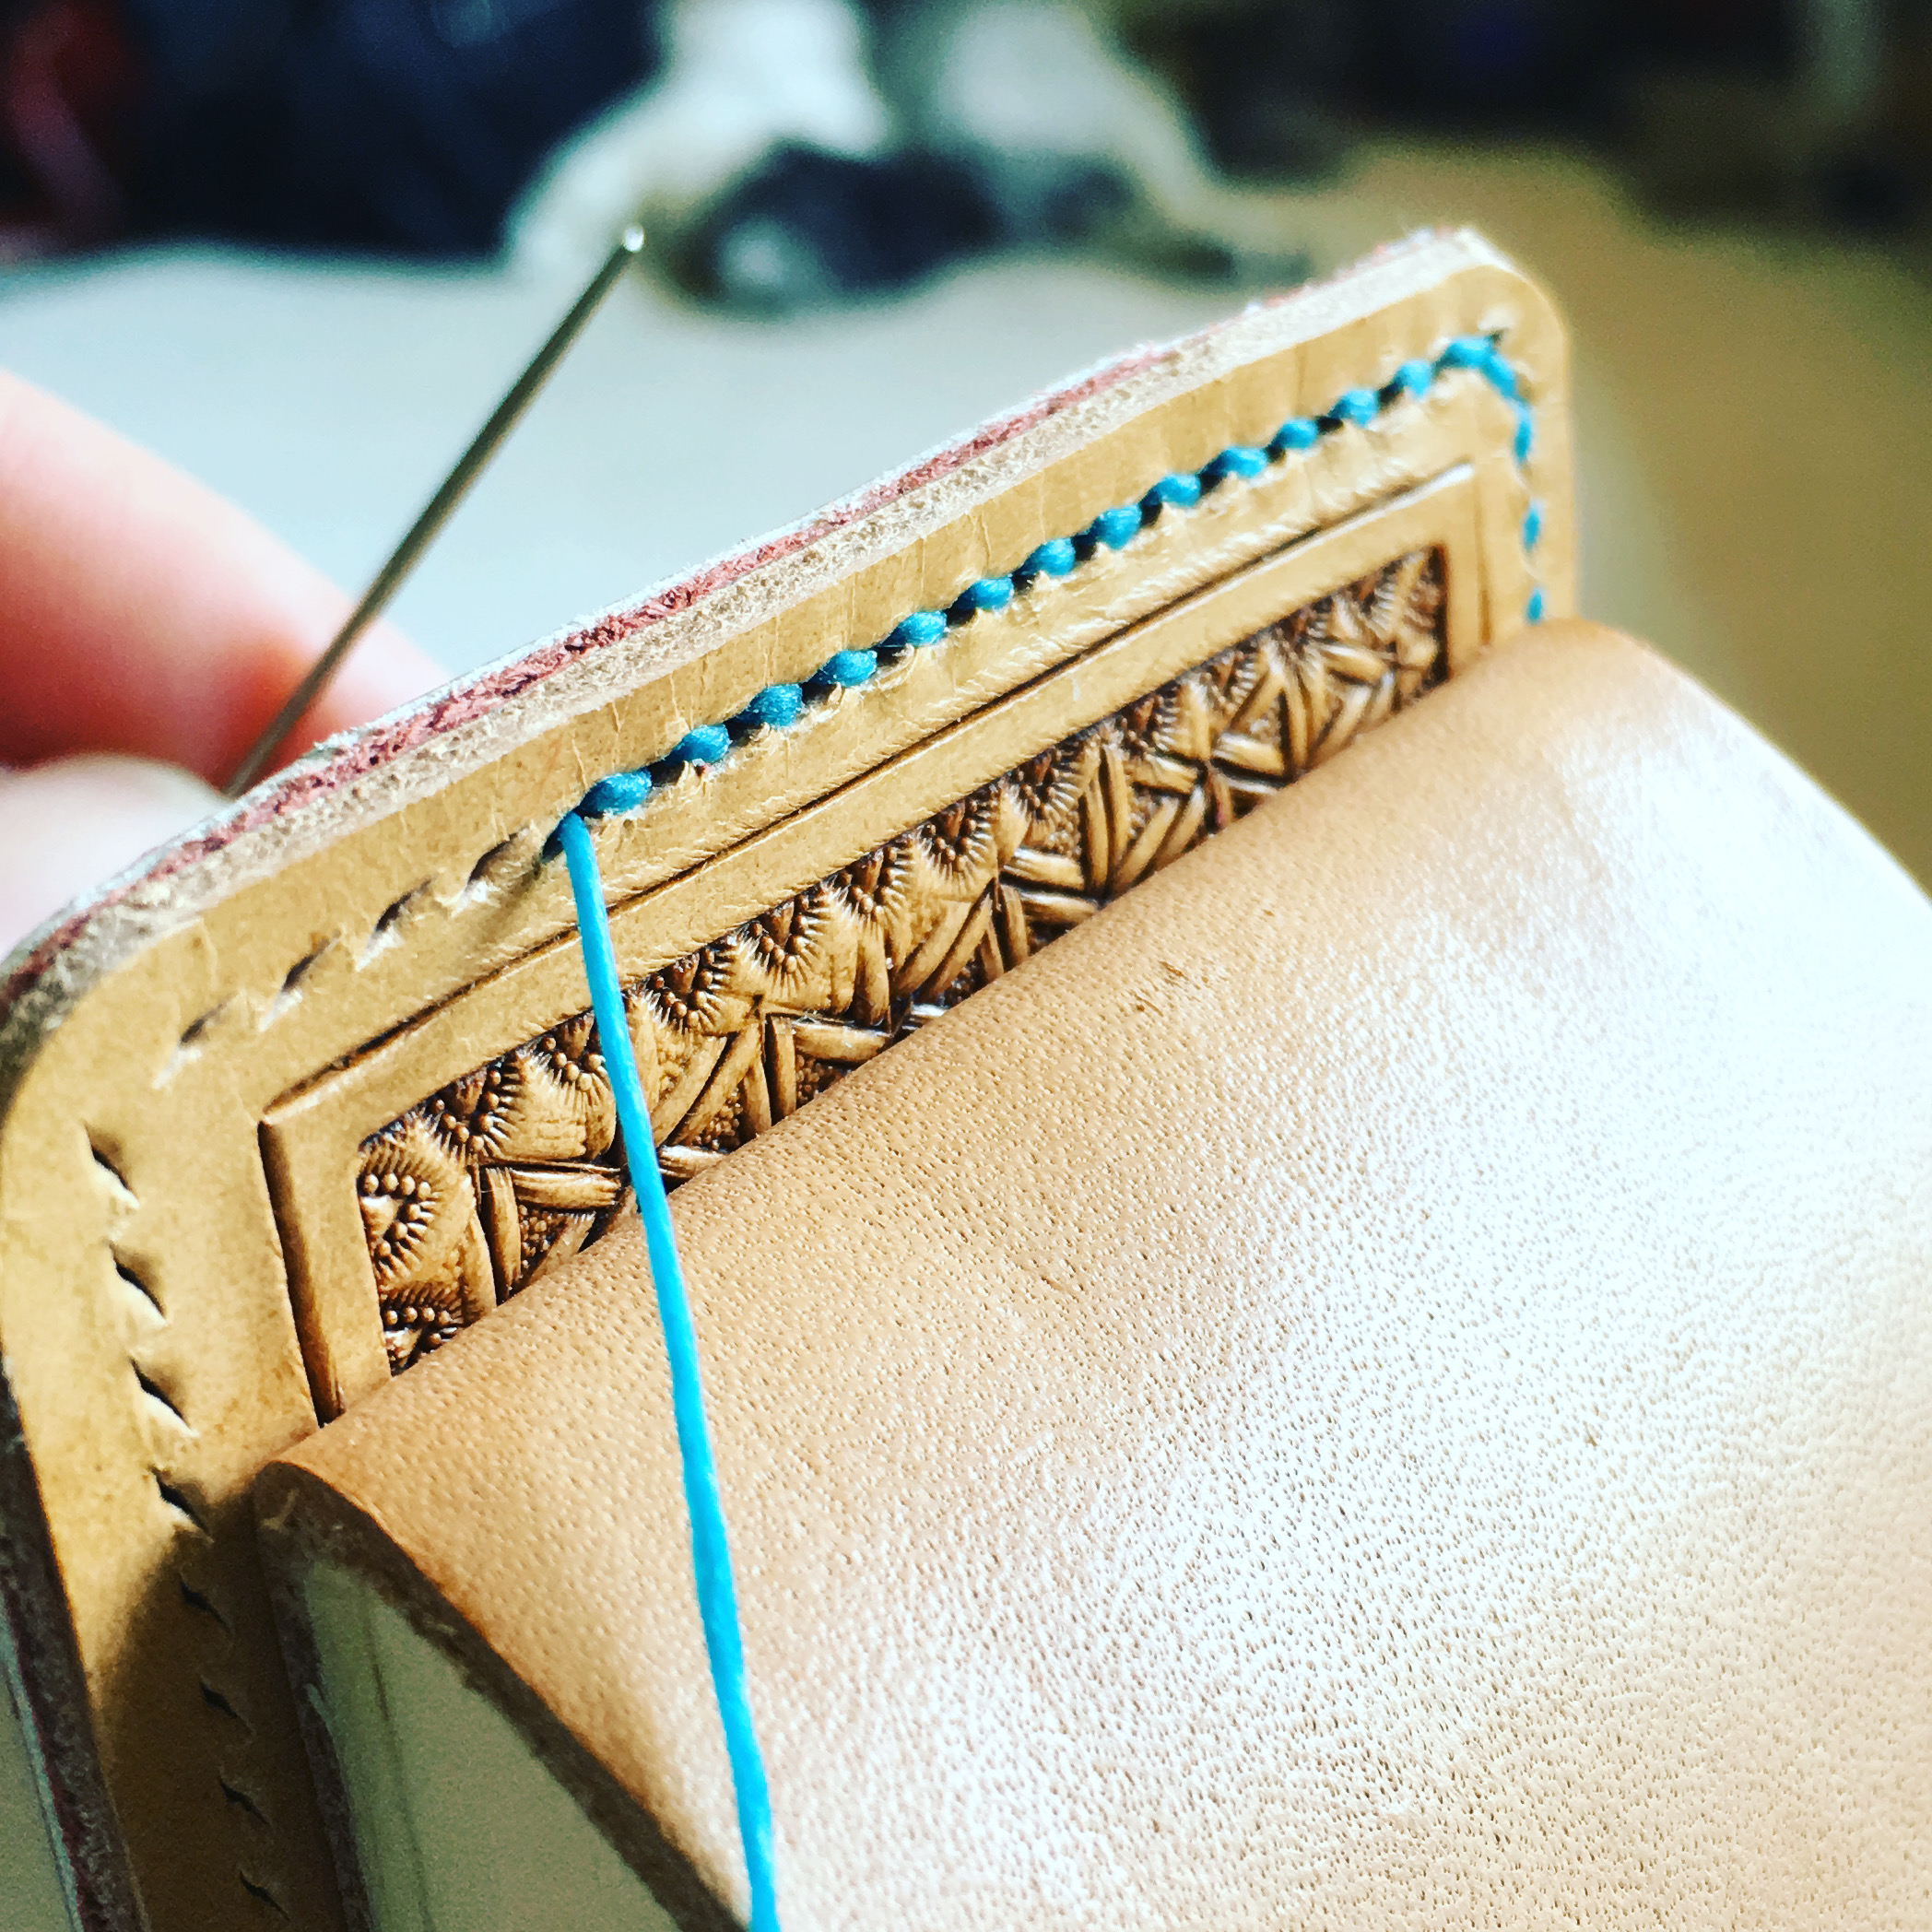 Tan Burnish Ostrich Embossed Relief Leather 